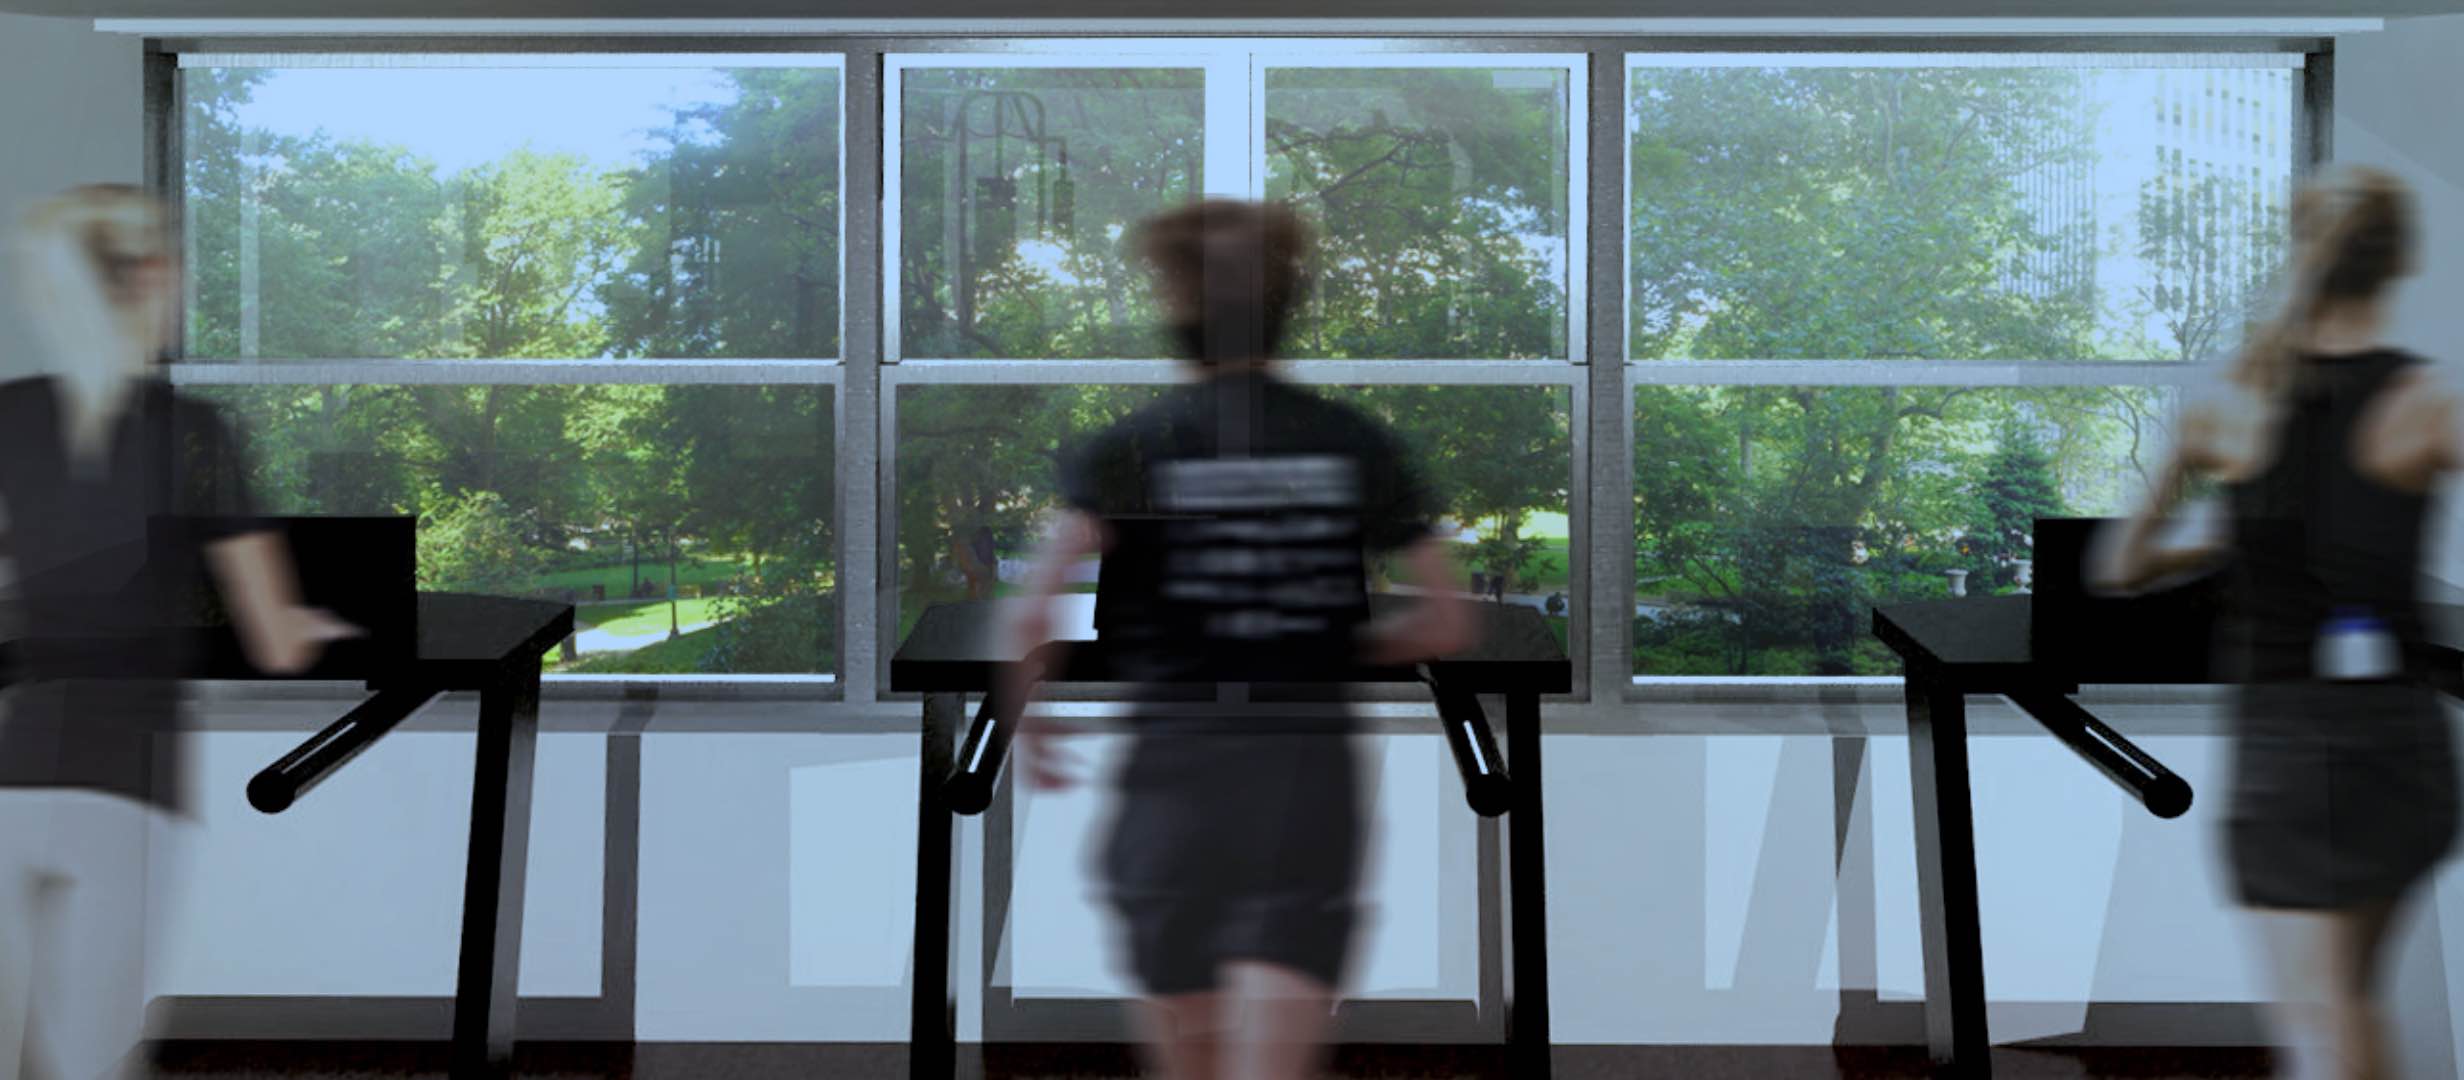 People running on treadmills in fitness center looking out glass windows